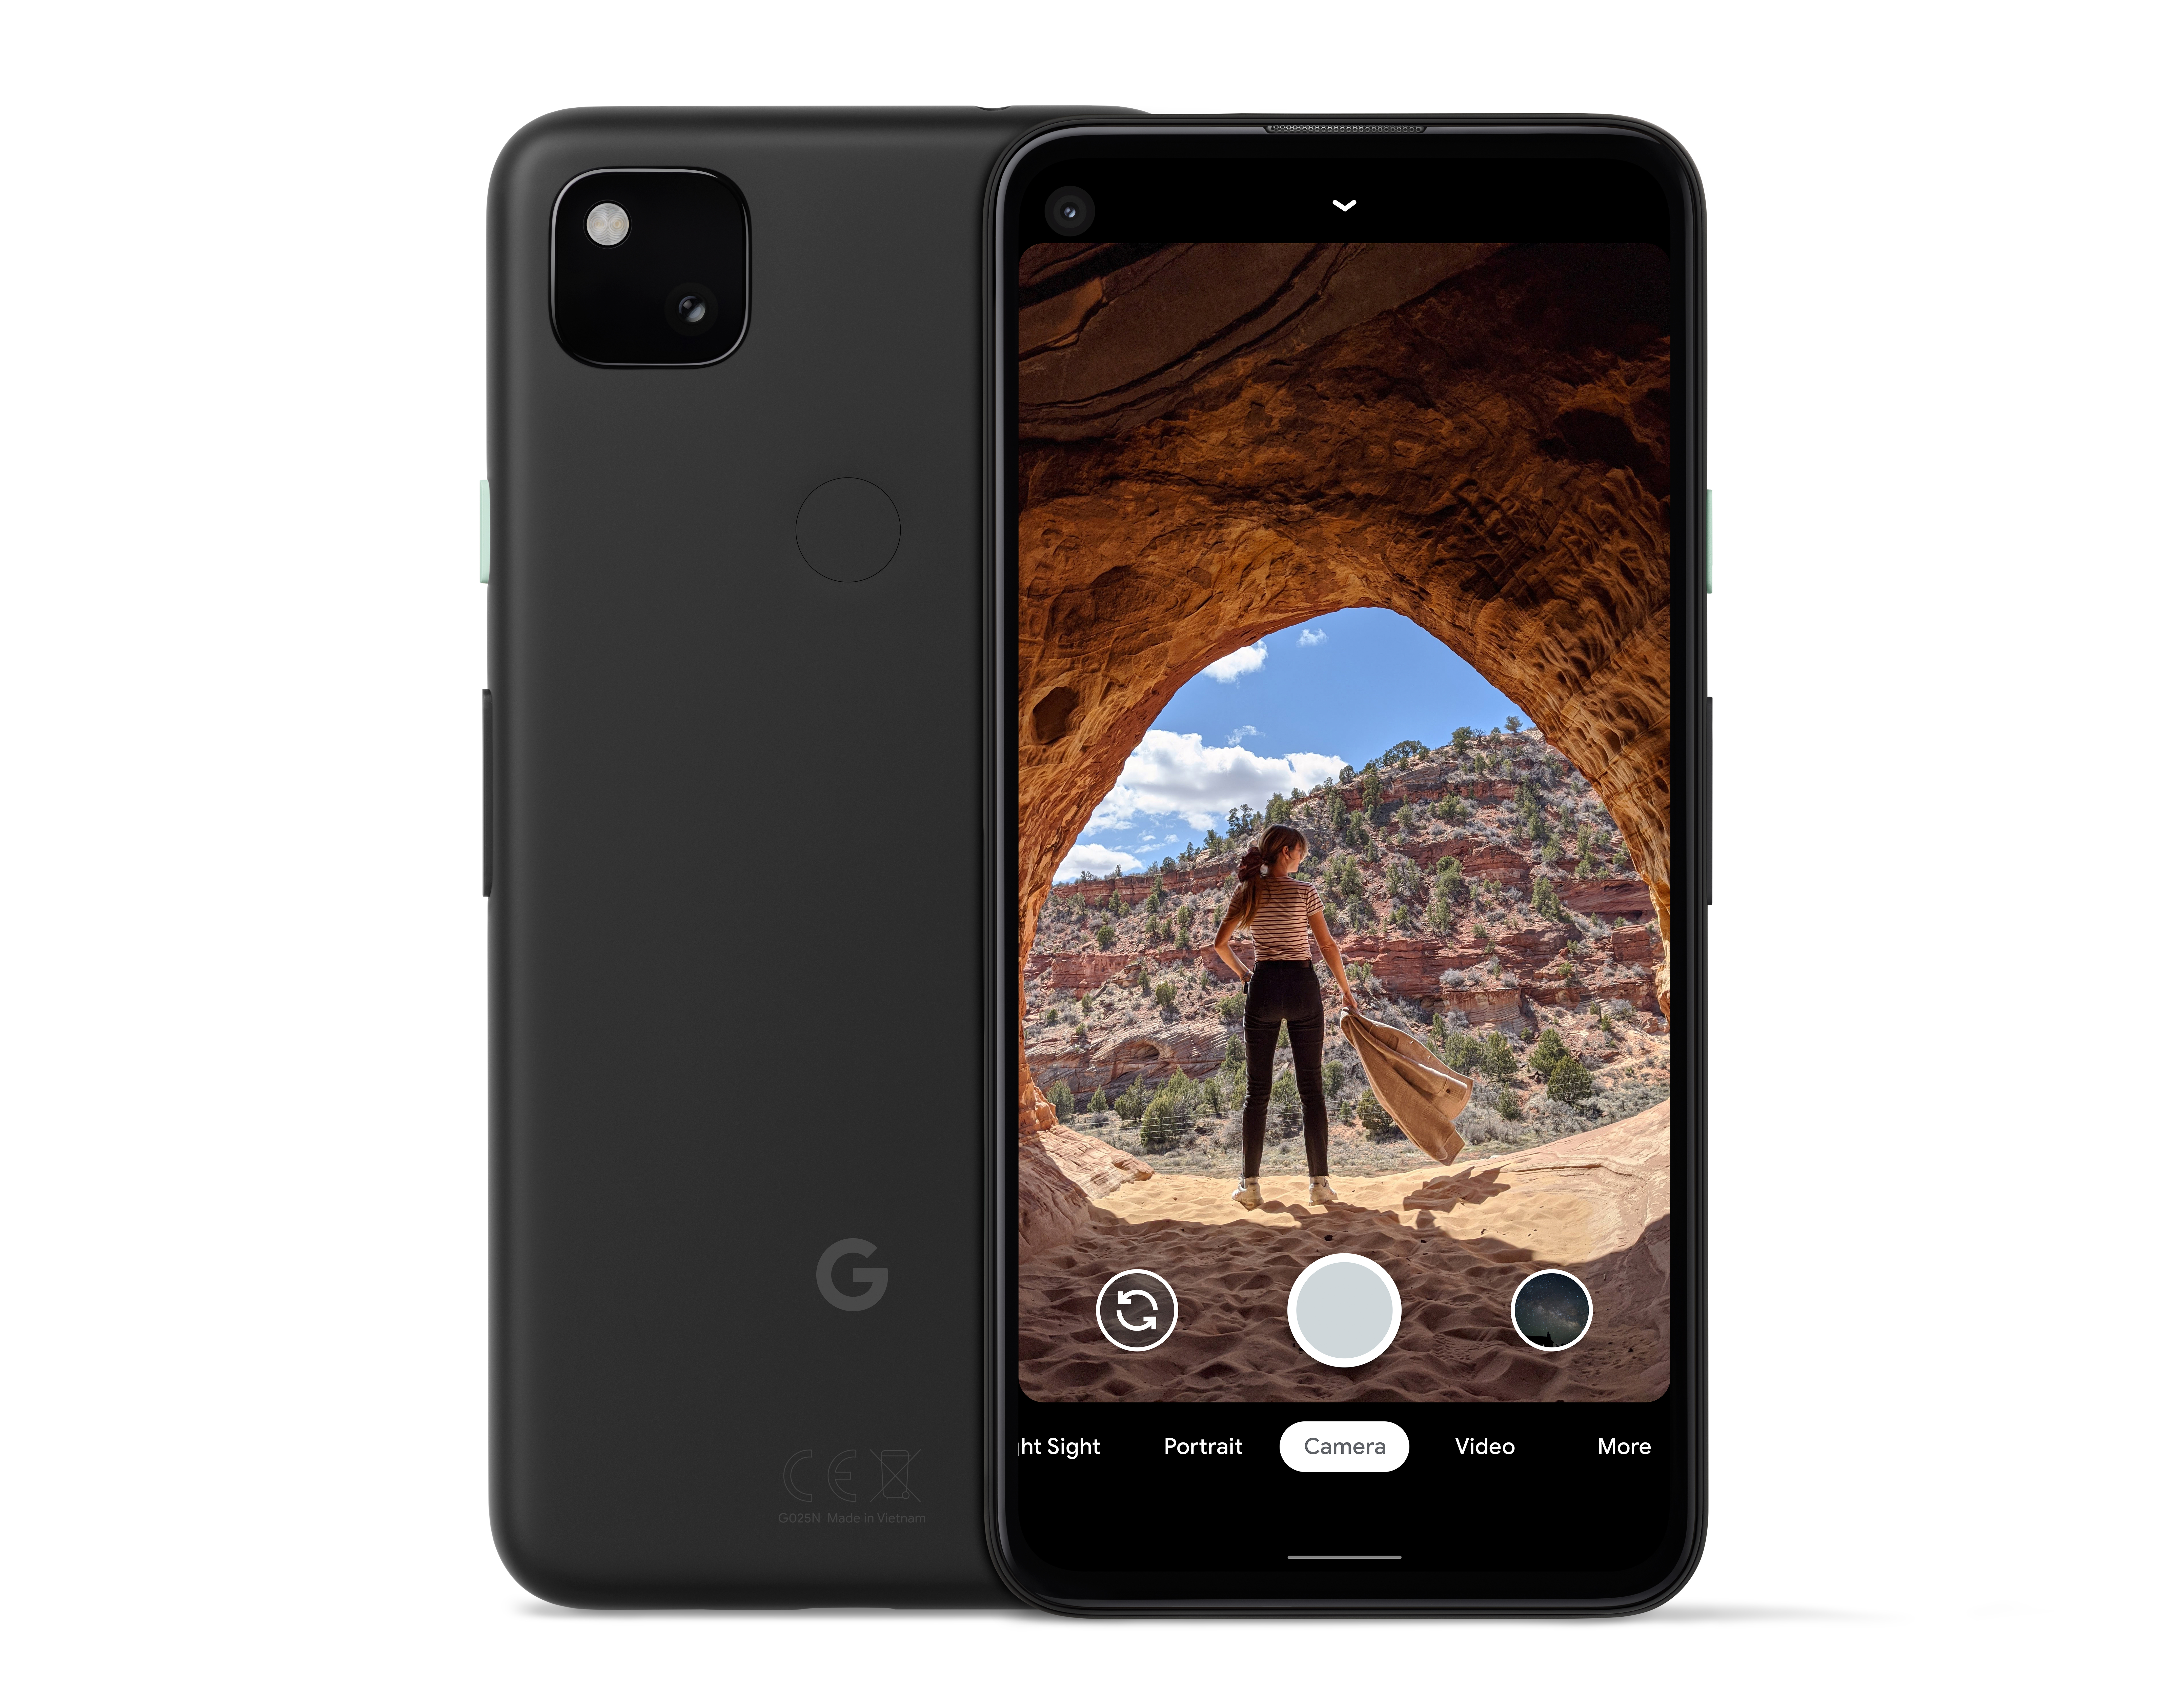 Google Pixel 4a will go on sale in October 